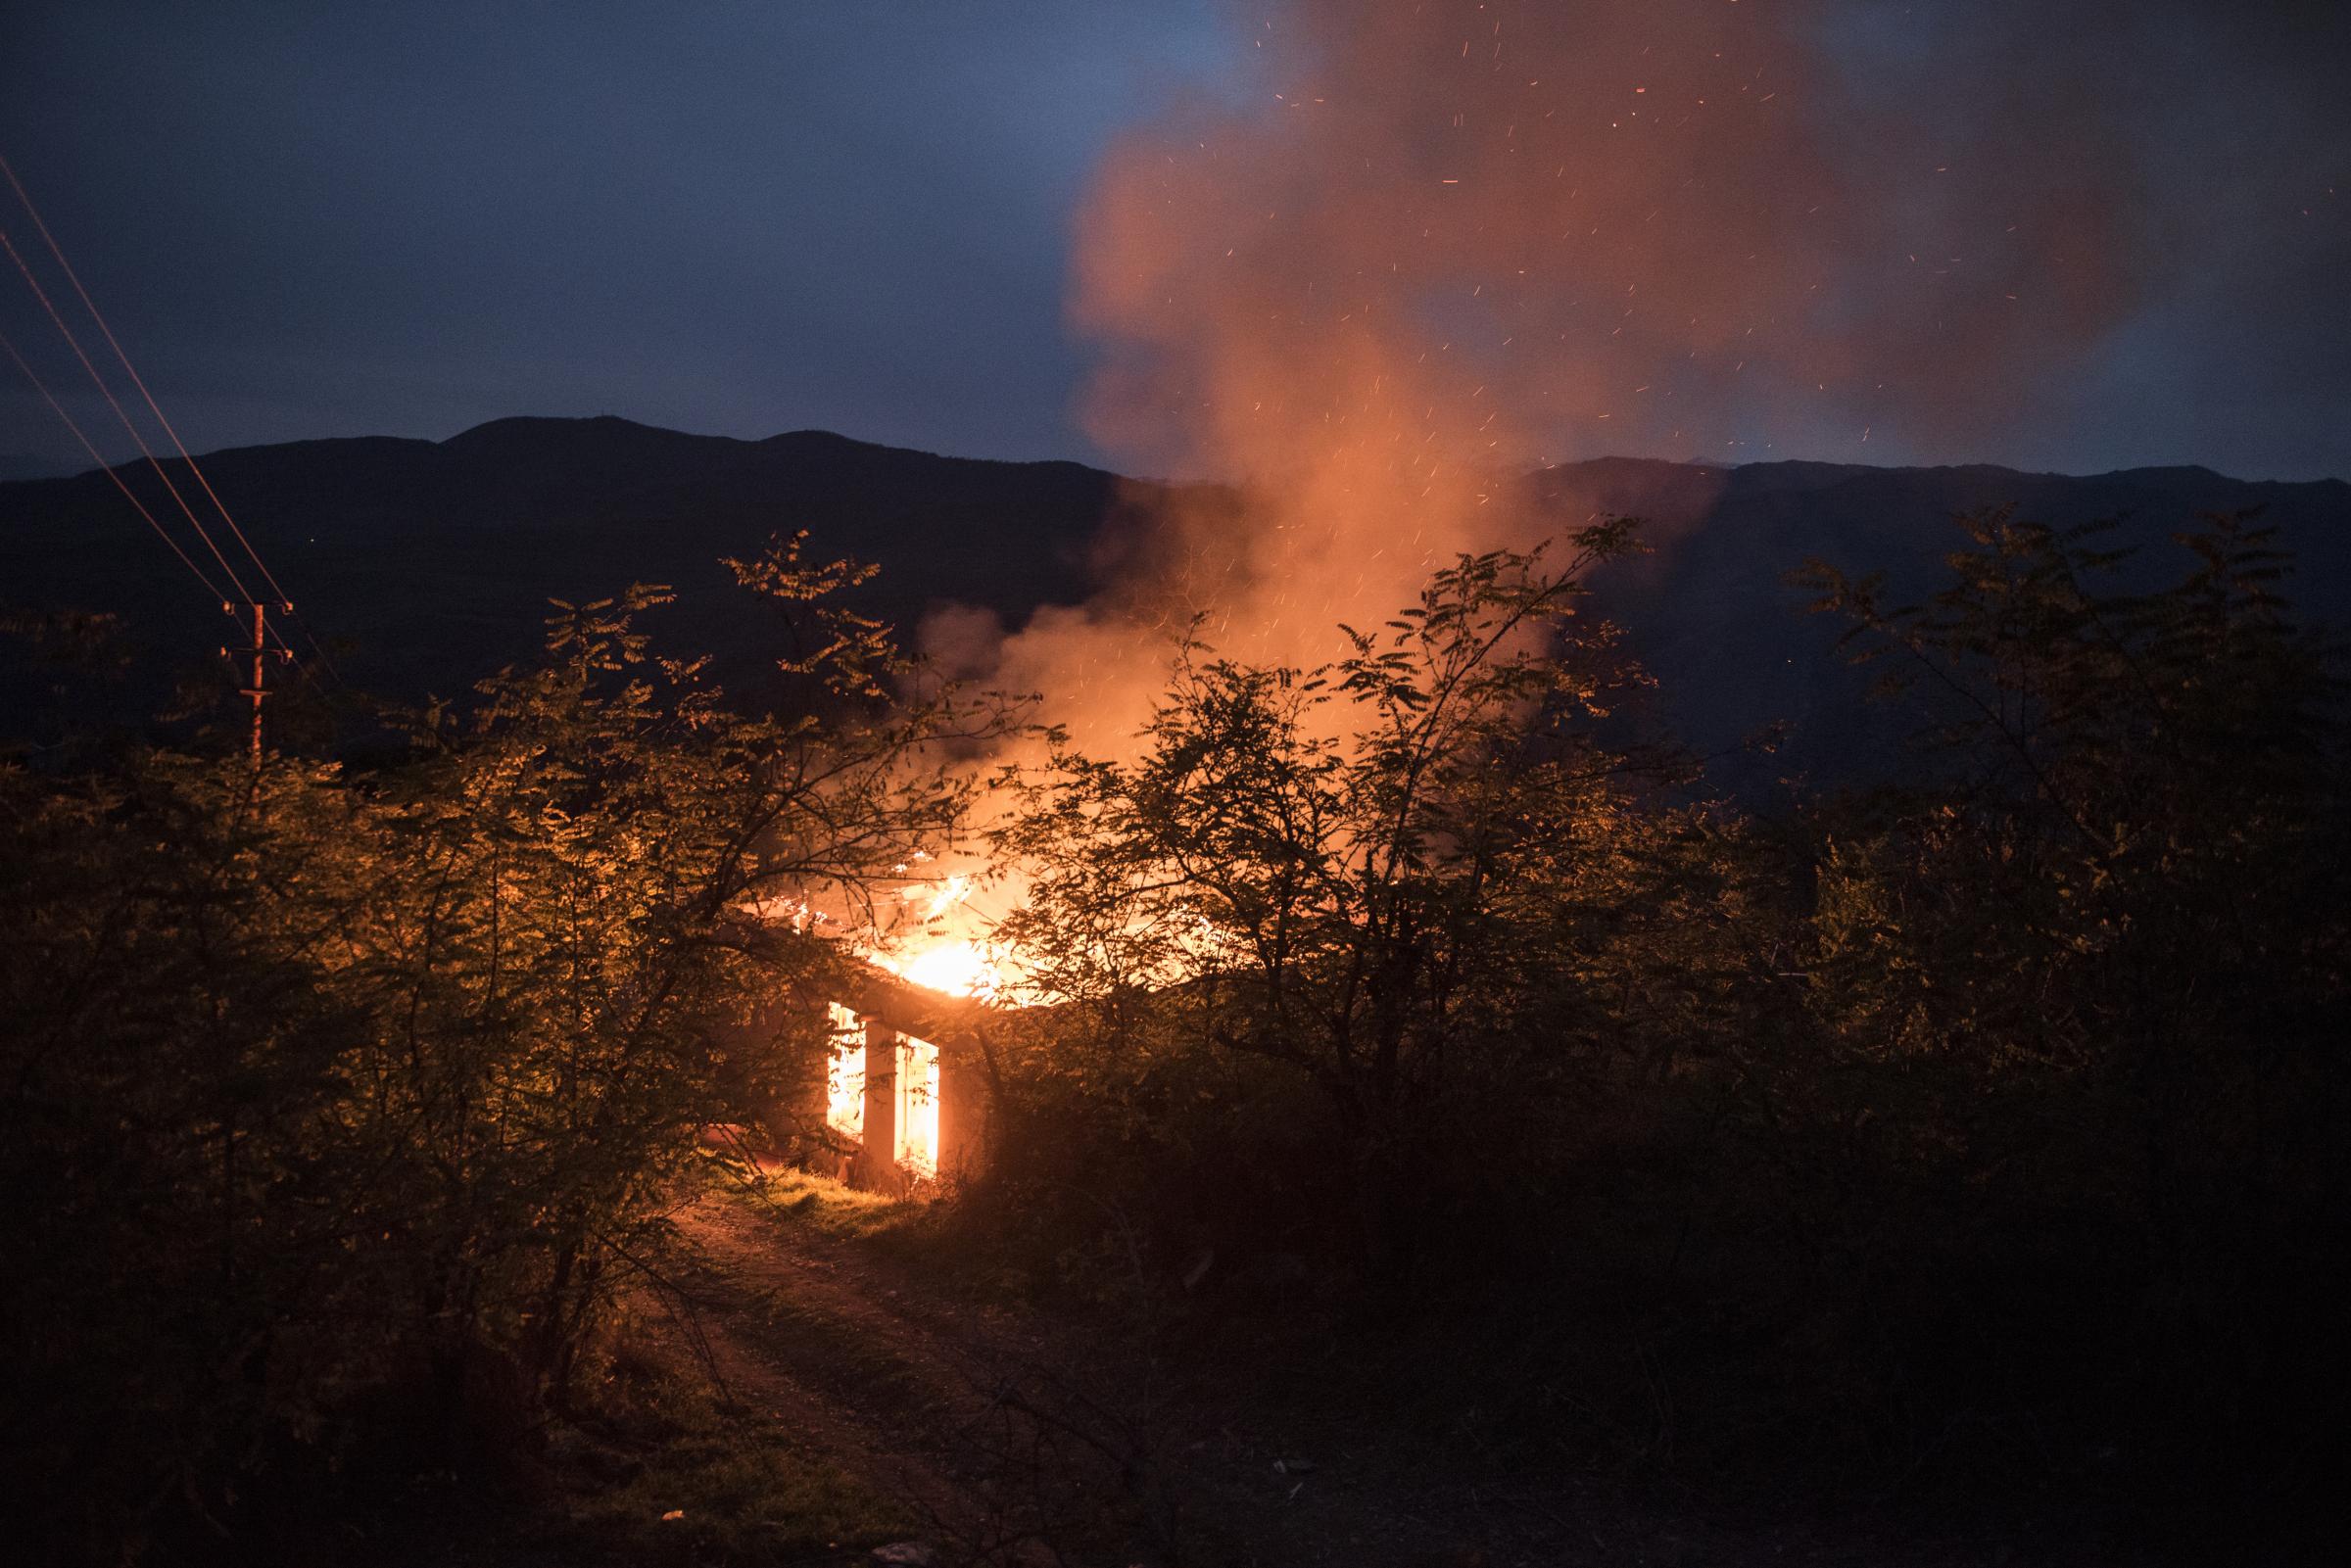 Paradise Lost - A burning house in the Kelbajar region of Nagorno-Karabakh. According to the peace agreement...